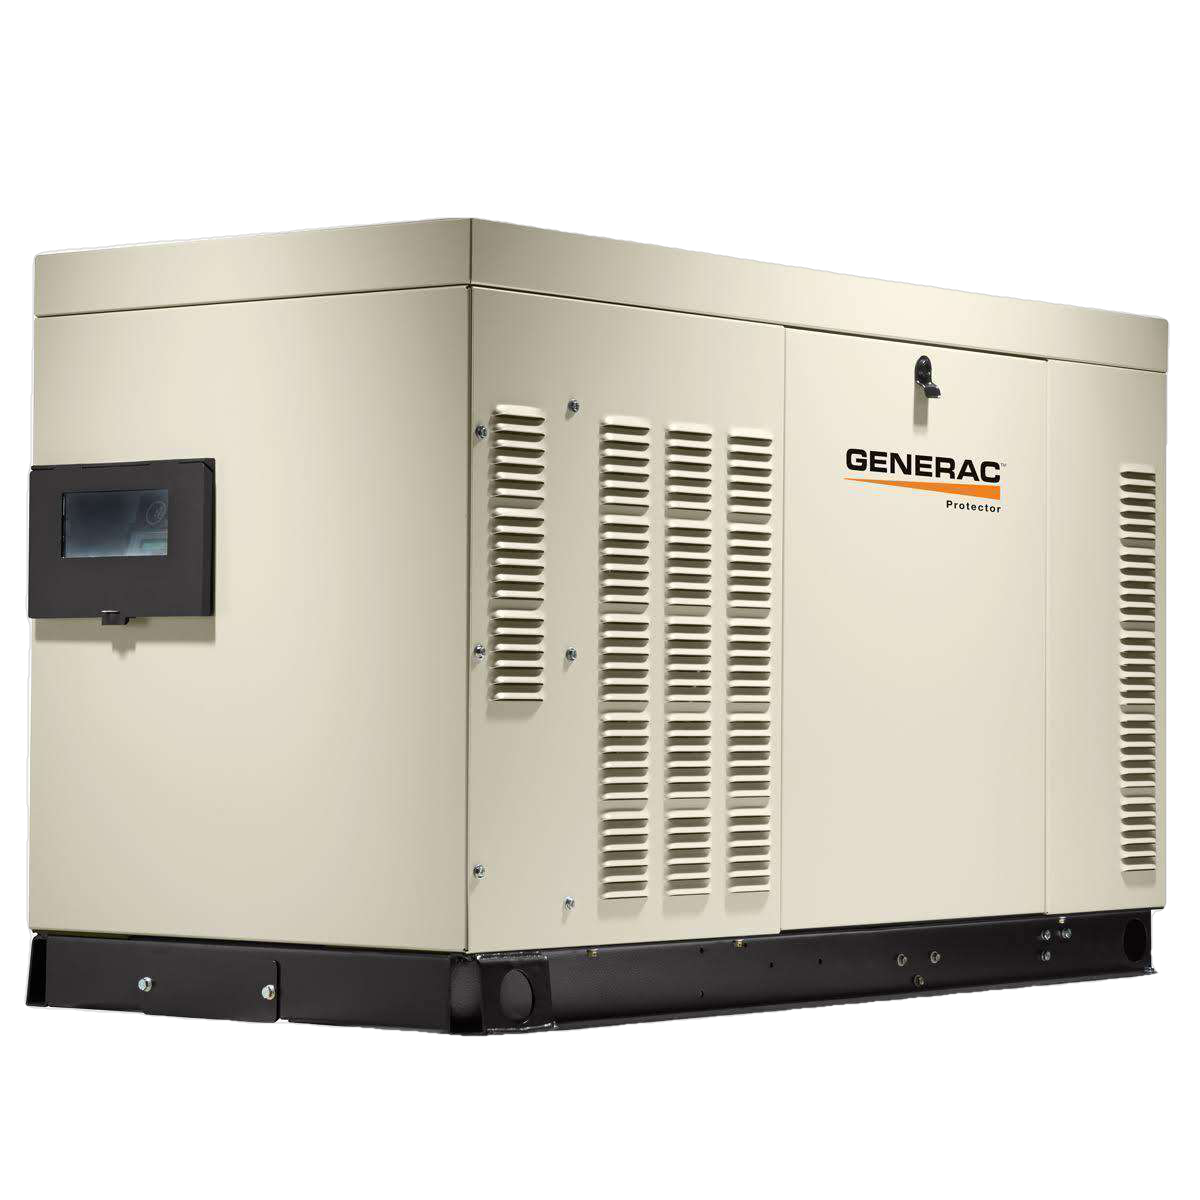 Generac, Generac Protector 25kW 120/208V RG02515GNSX Liquid Cooled 3 Phase Standby Generator New